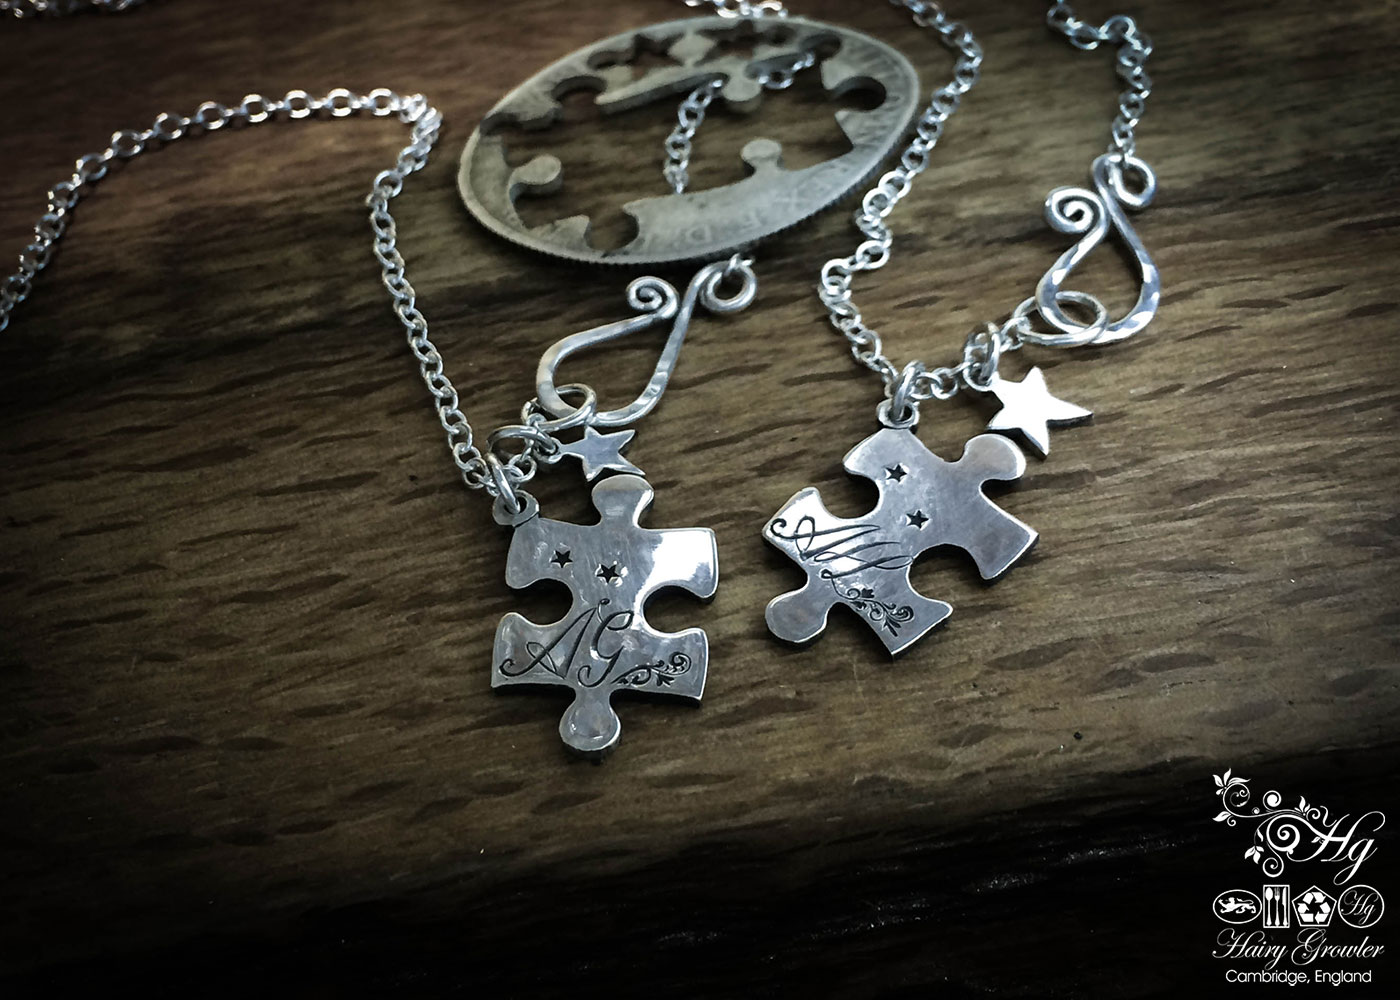 Jigsaw necklace Handmade and repurposed jigsaw pieces necklace silver coin